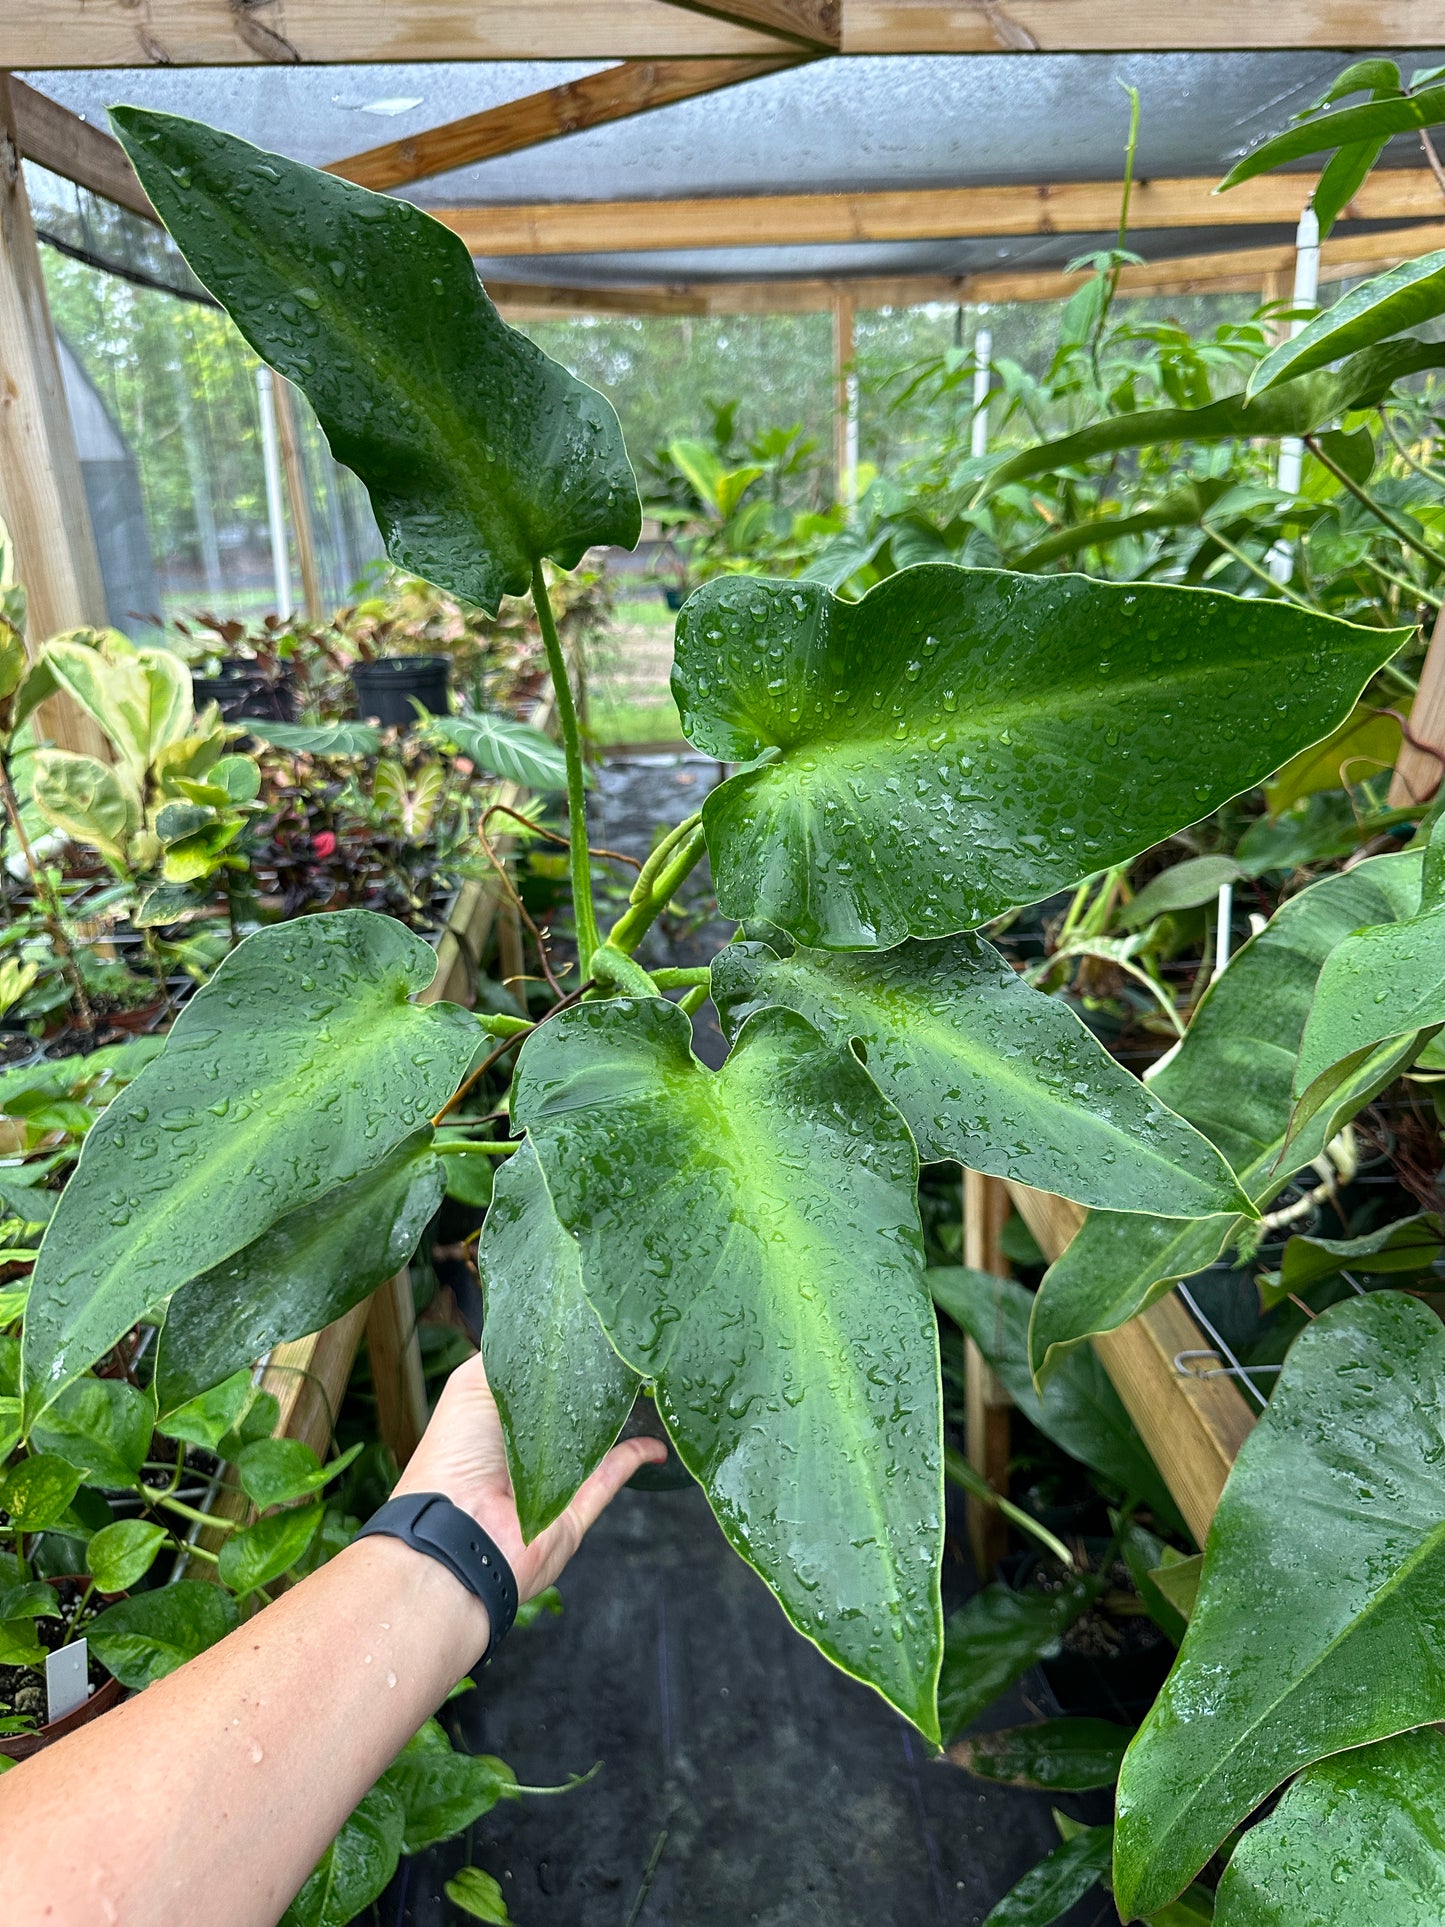 Philodendron Rugosum Aberrant Form XL